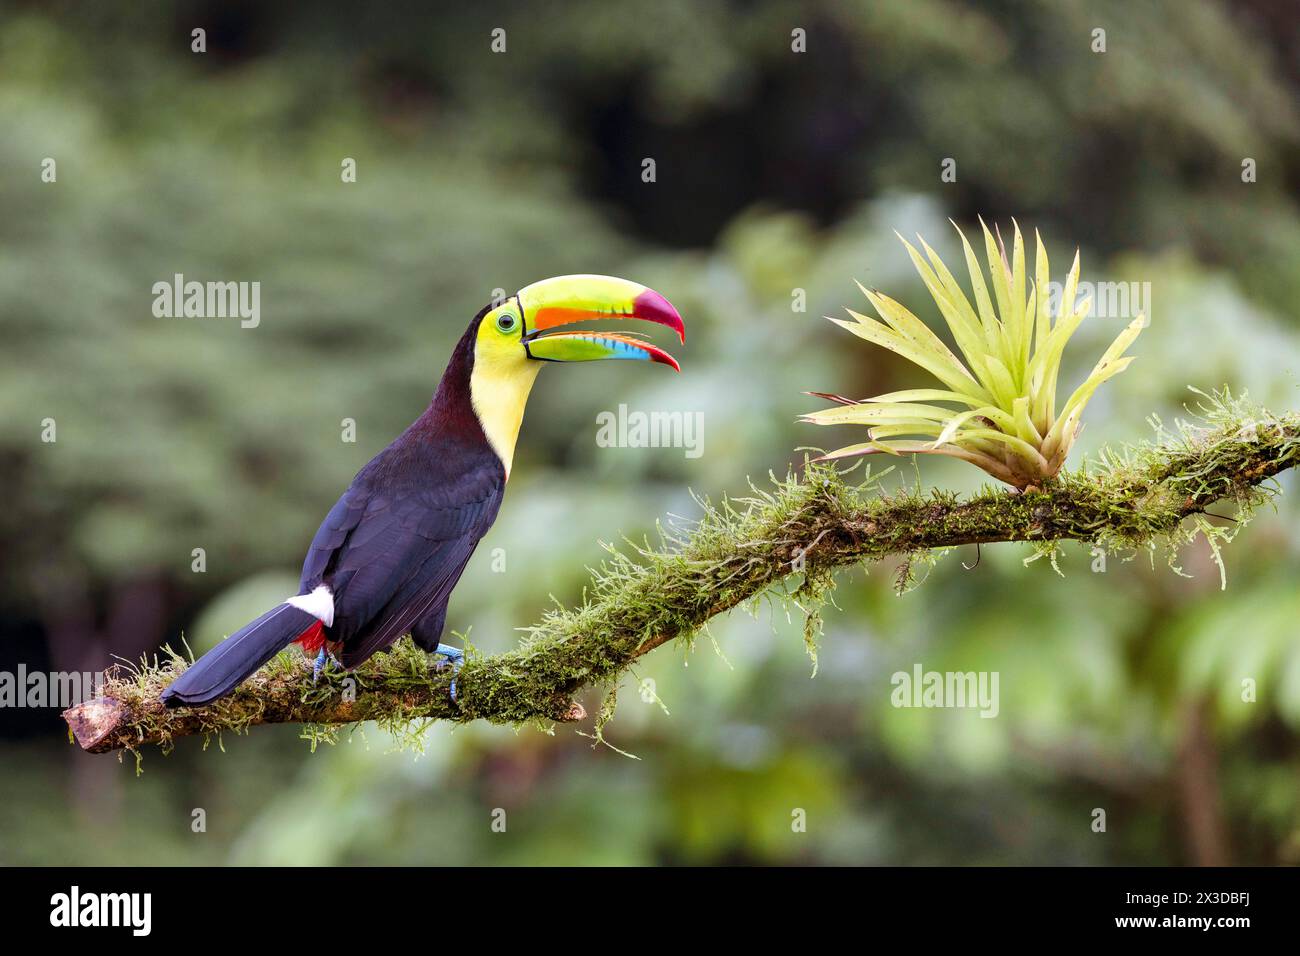 Keel-billed toucan, Sulfur-breasted toucan, Keel toucan, Rainbow-billed toucan (Ramphastos sulfuratus), sits on a branch in the rainforest with its be Stock Photo